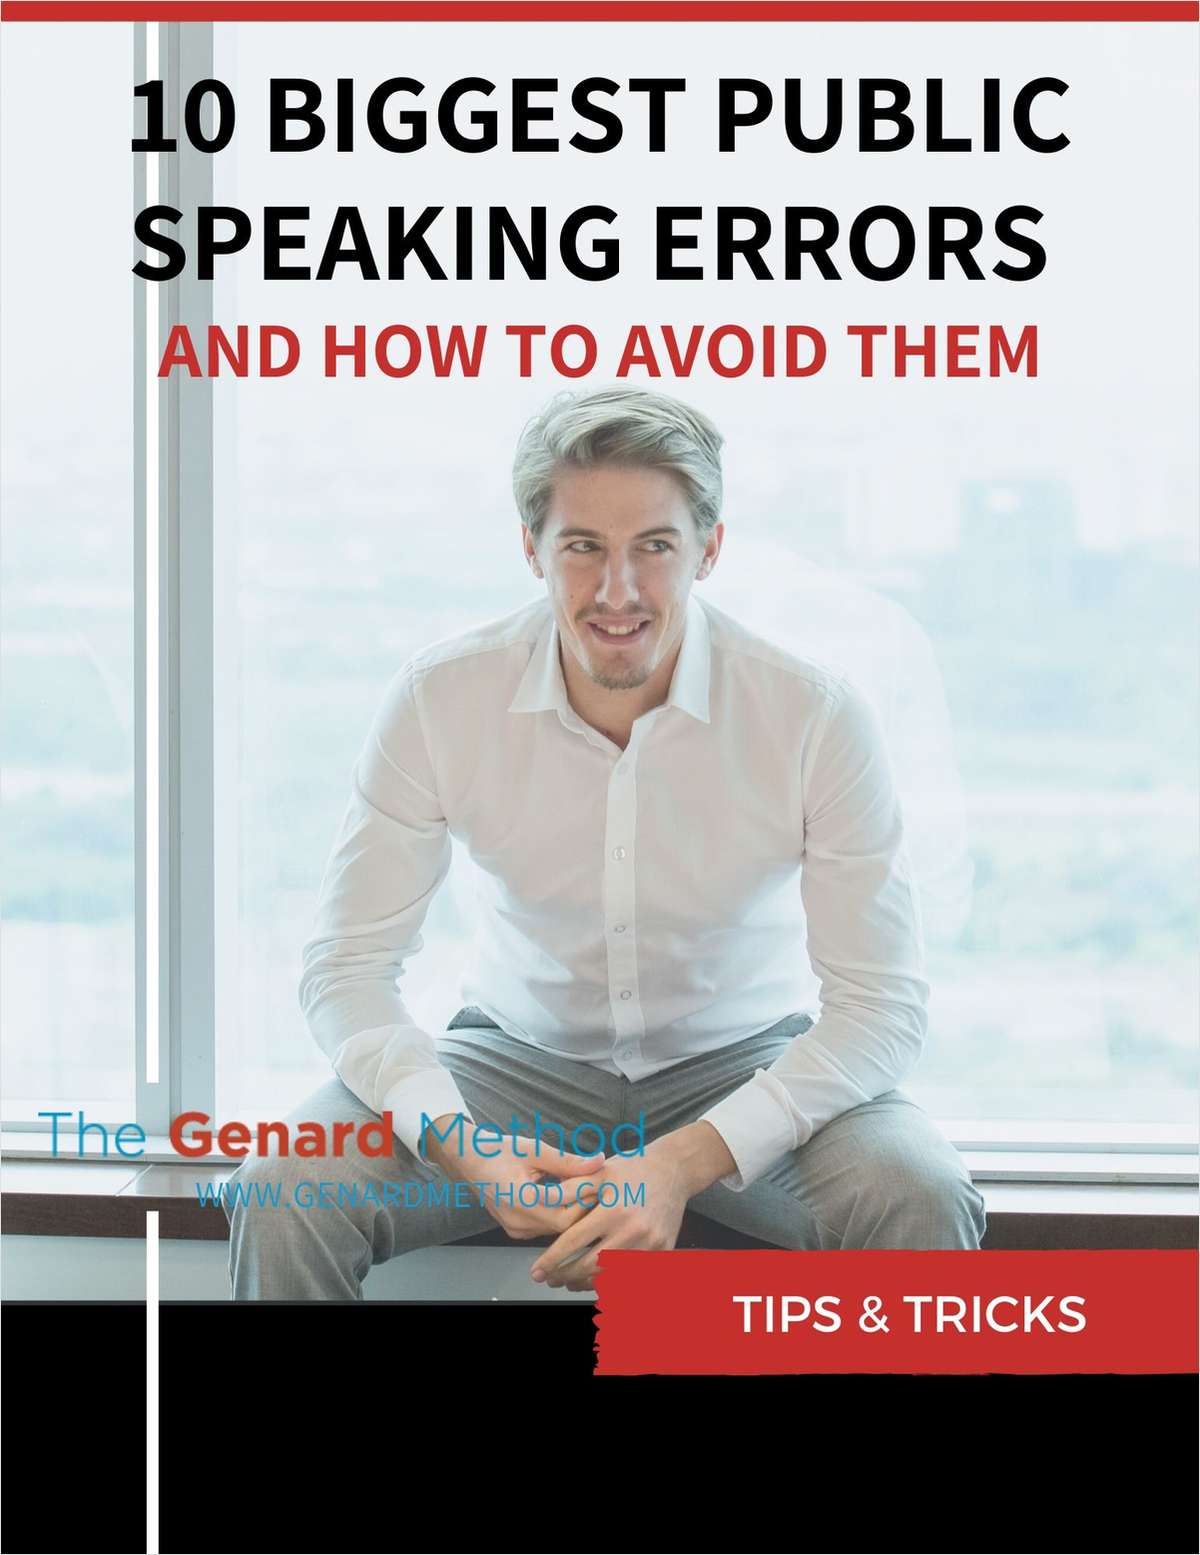 10 Biggest Public Speaking Errors (and How to Avoid Them)